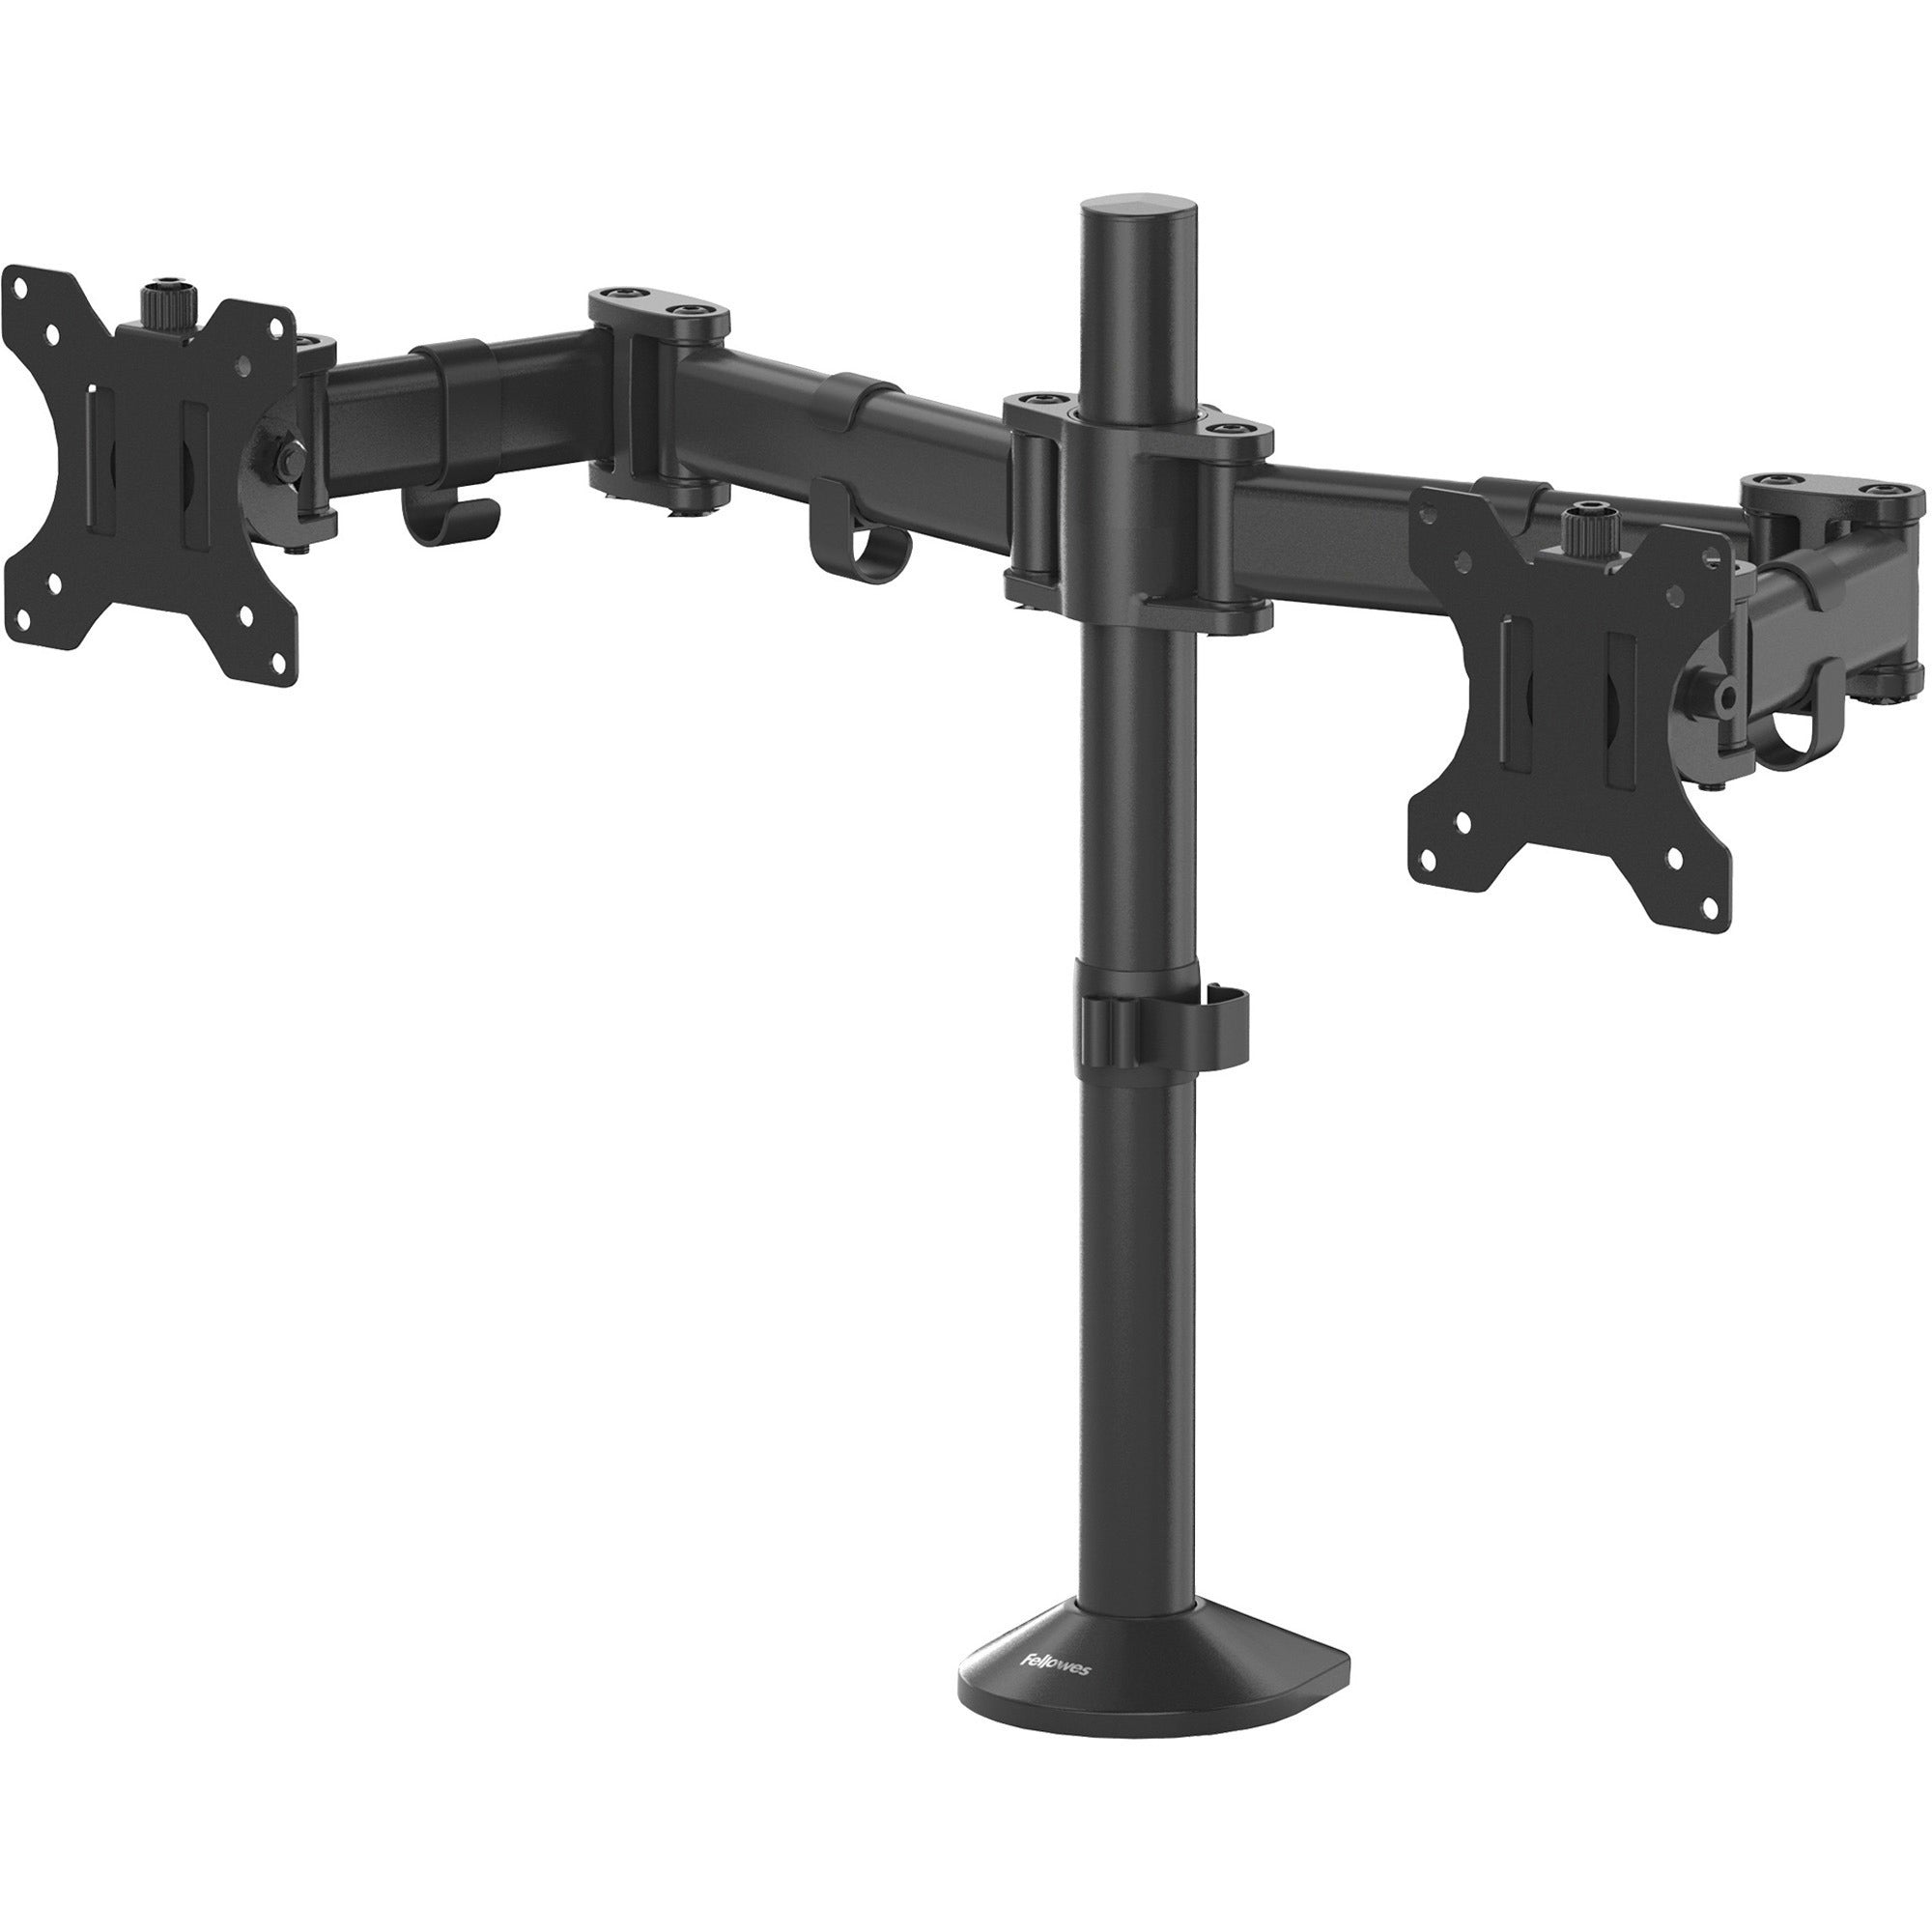 fellowes-reflex-dual-monitor-arm-2-displays-supported-30-screen-support-48-lb-load-capacity_fel8502601 - 4